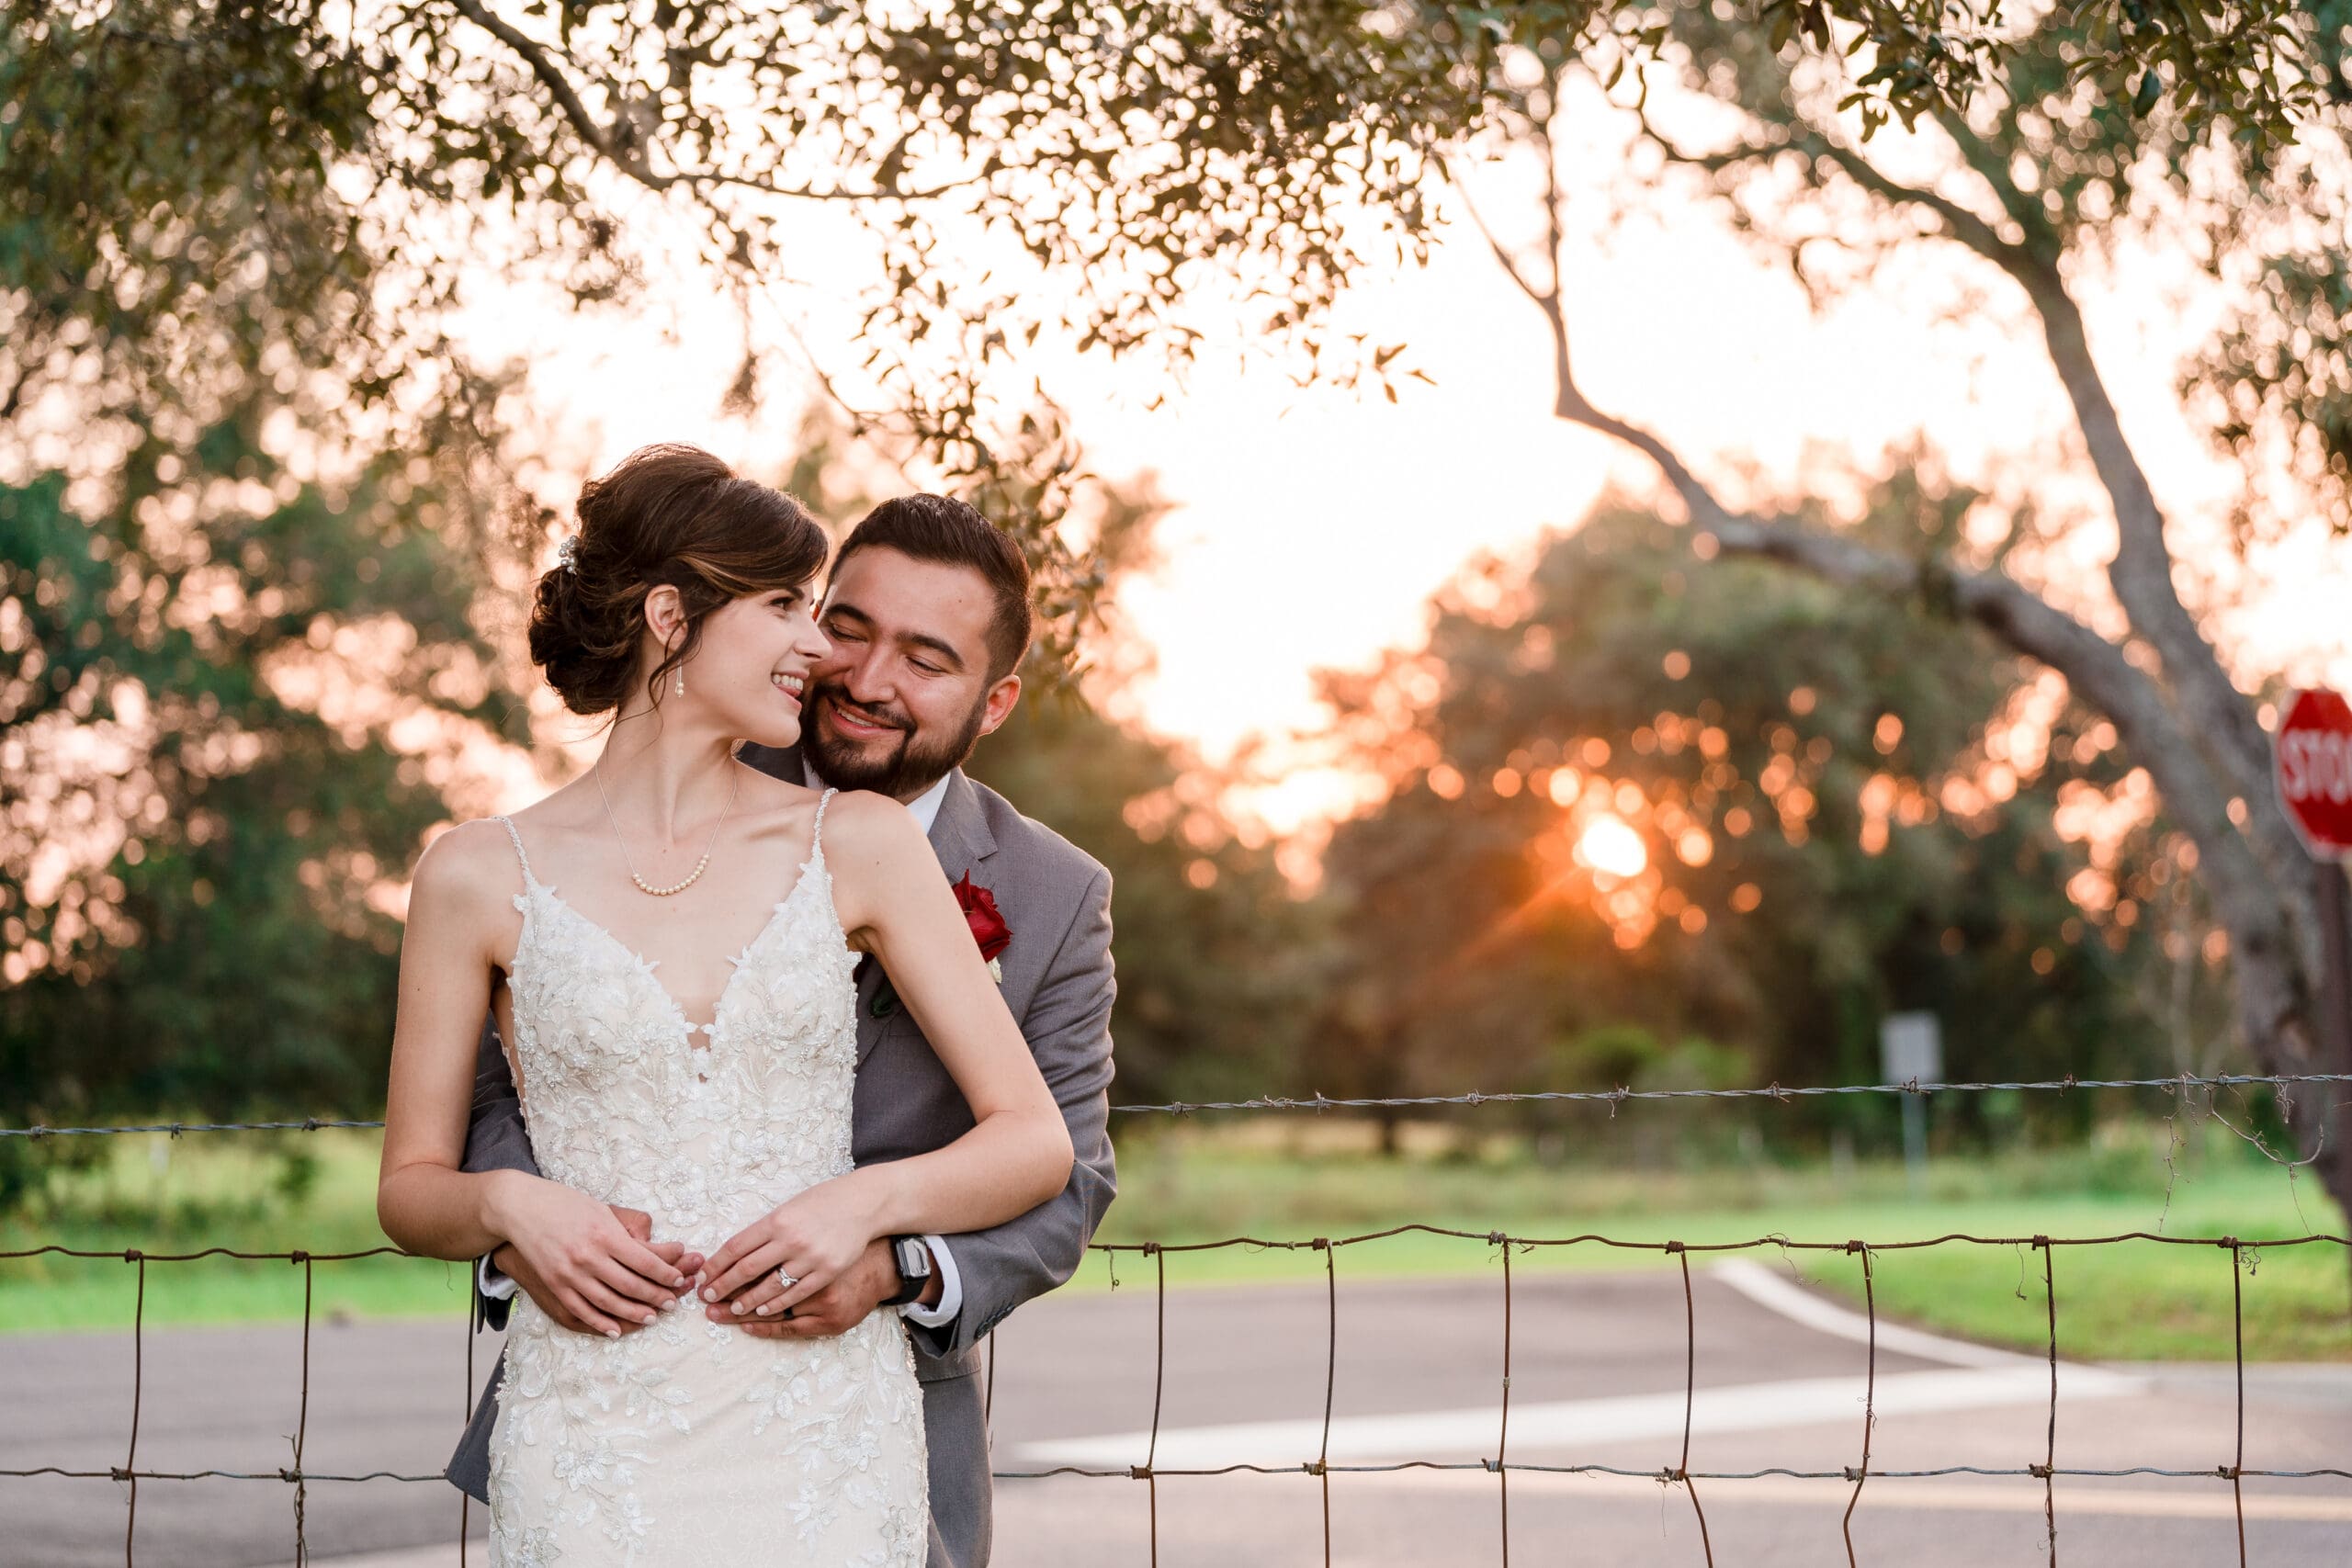 Bethany and Jonah embracing as newlyweds in the garden at Sterling Event Venue, with the sunset in the background.